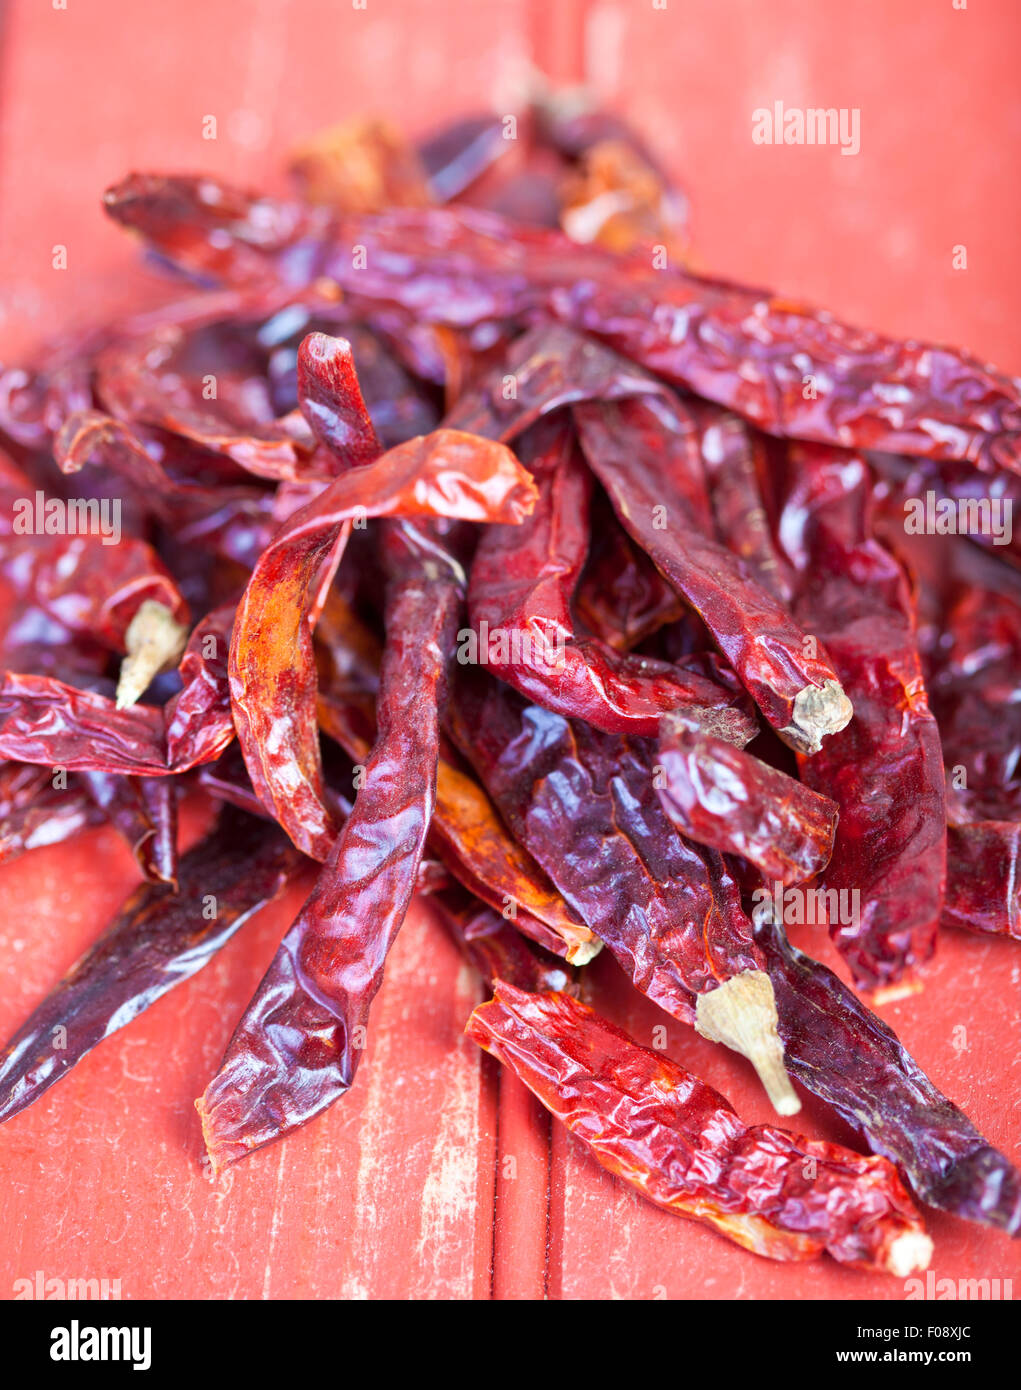 Dried red pepper on a red table tp background Stock Photo